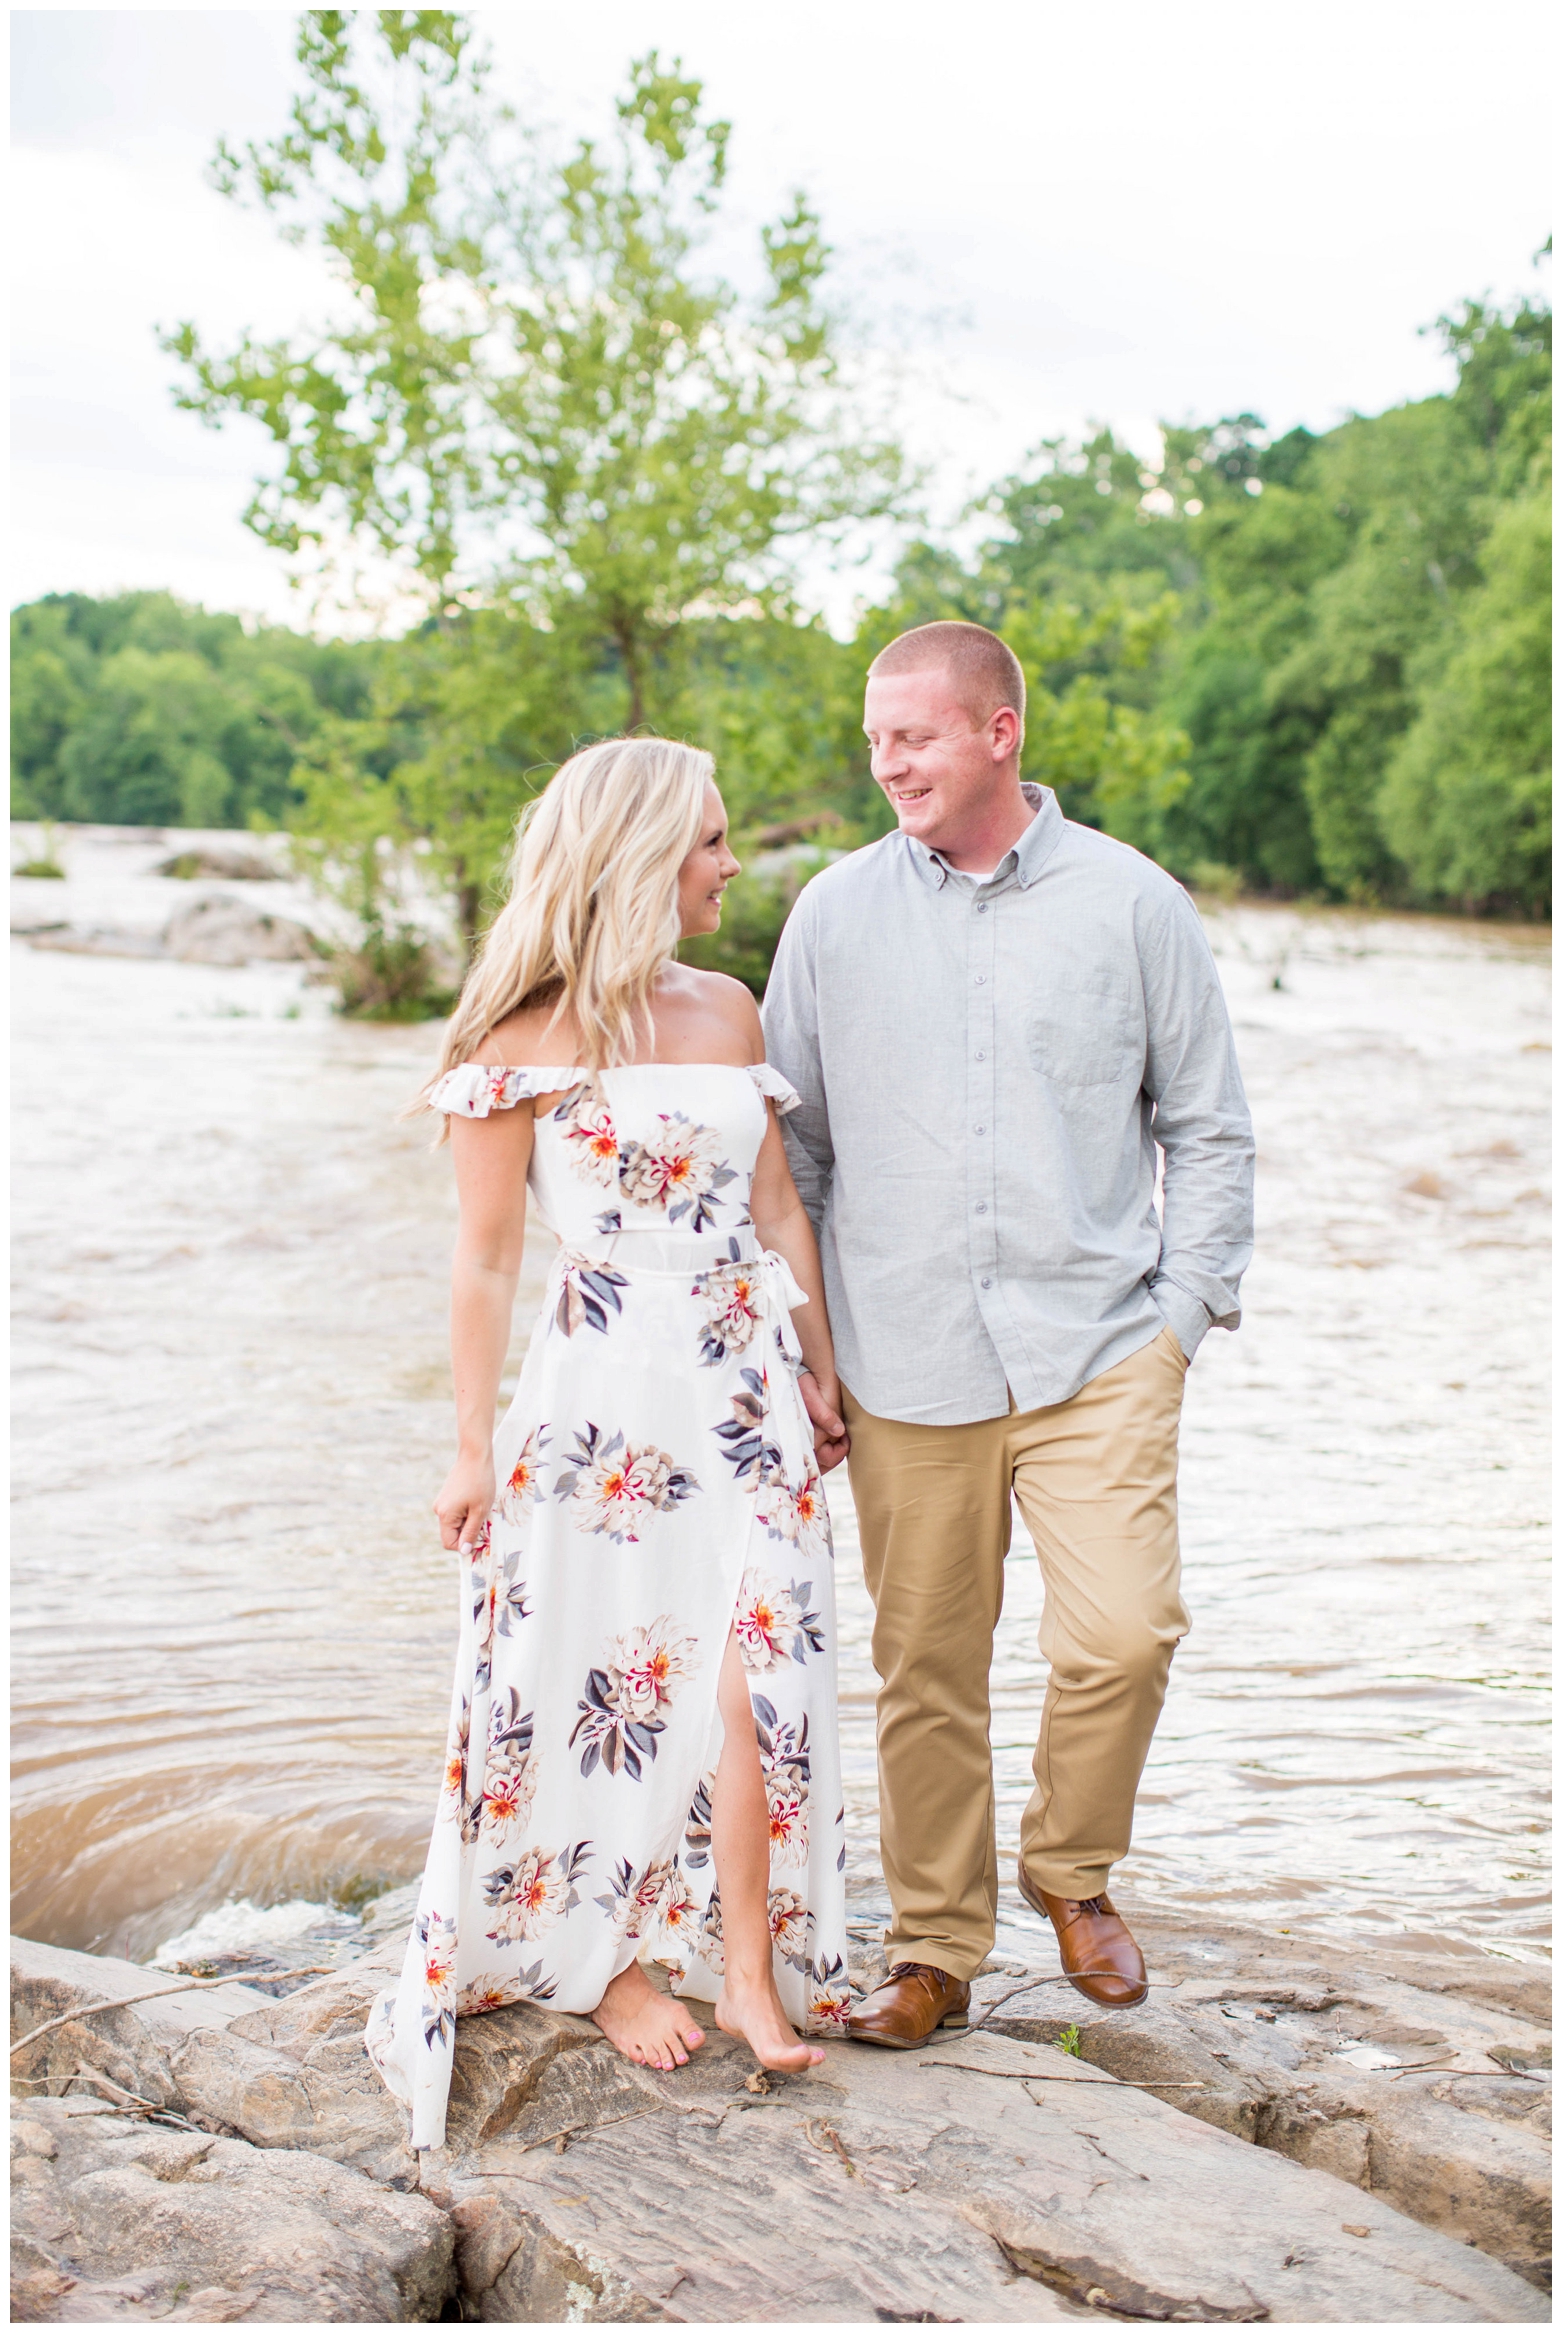 View More: http://hopetaylorphotographyphotos.pass.us/shelby-and-eric-anniversary